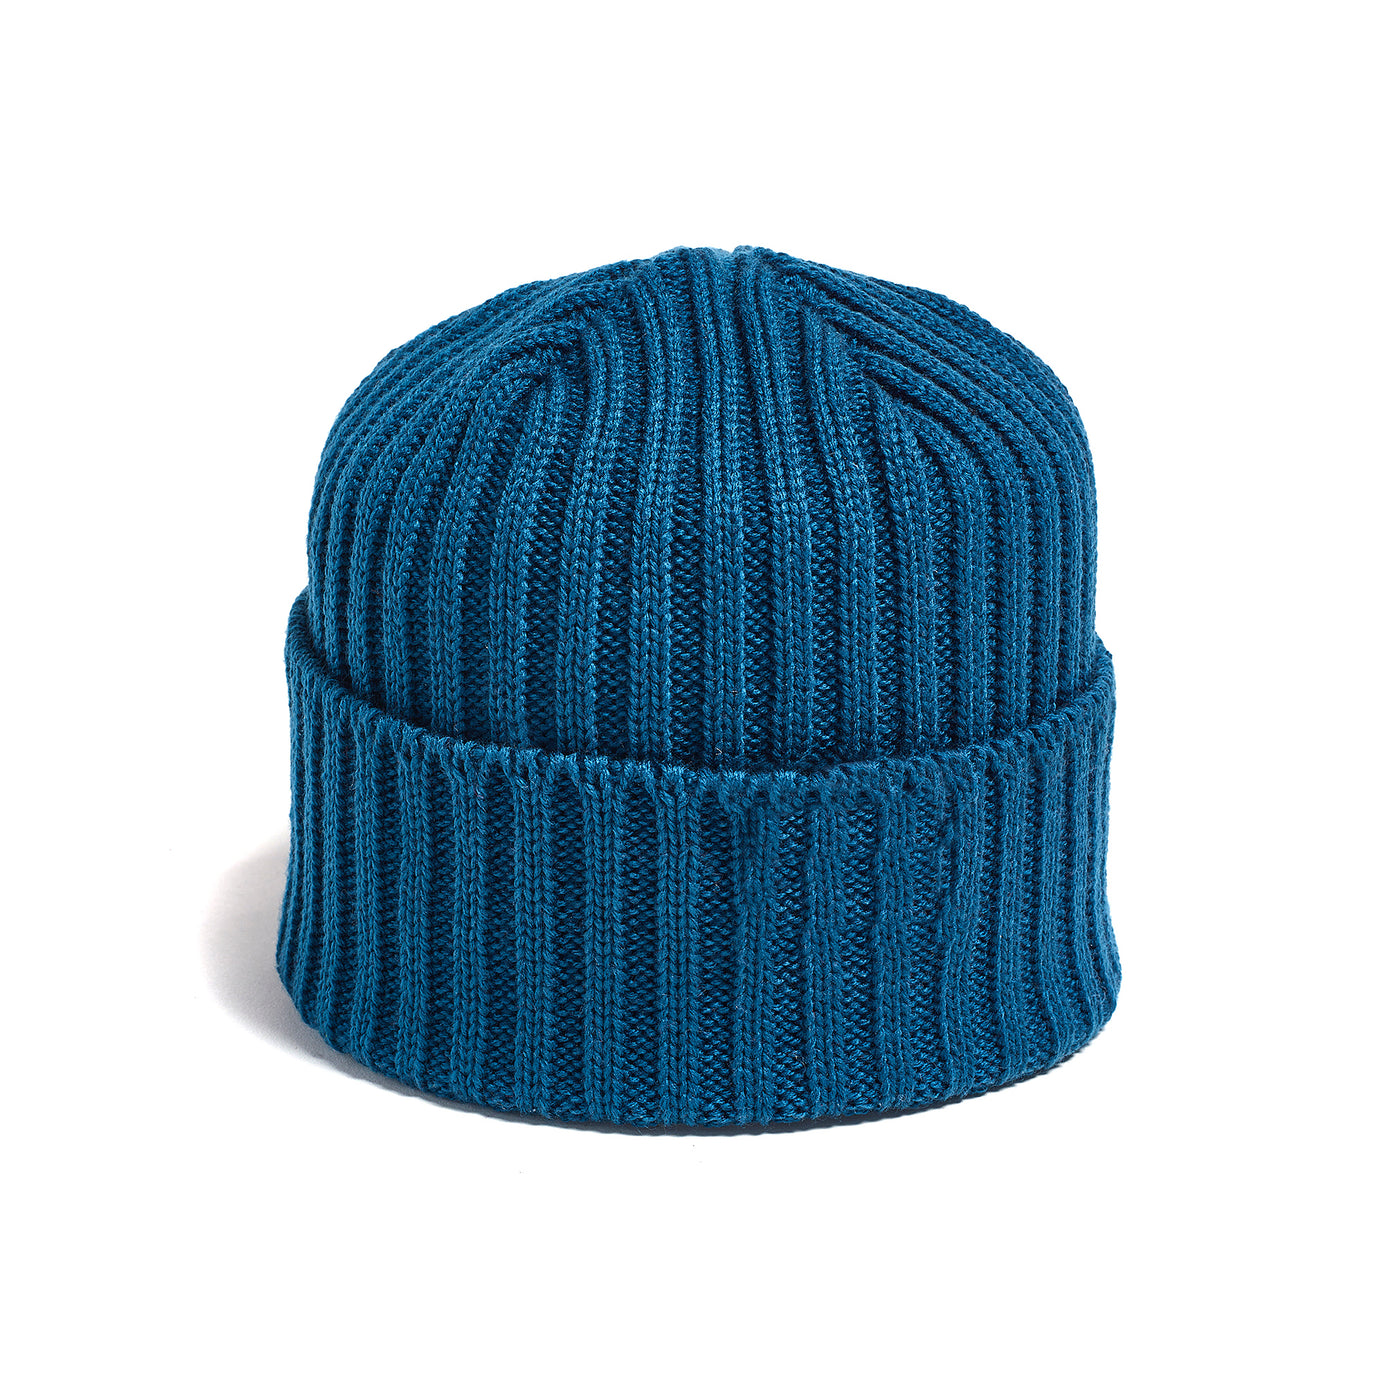 The Shore Pin Hat